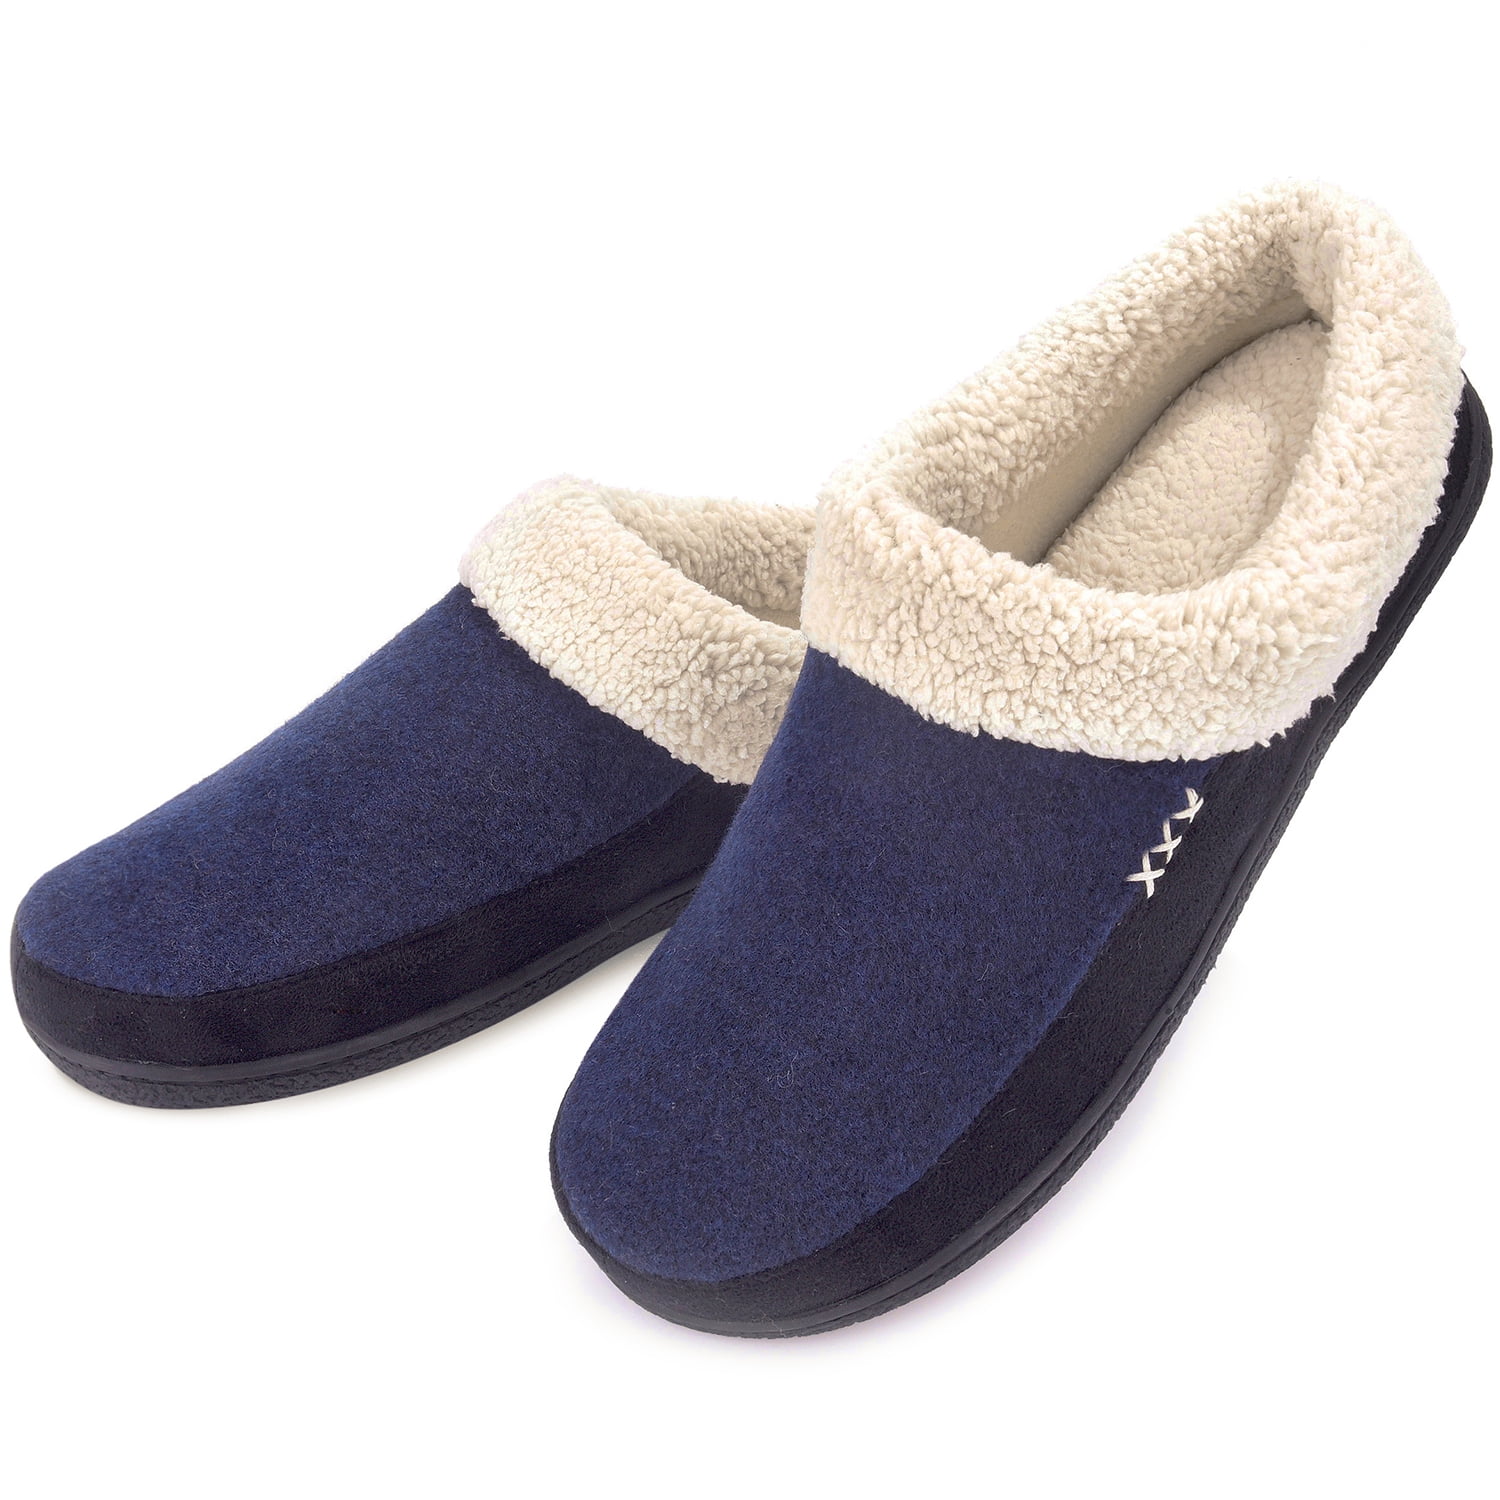 VONMAY - Vonmay Men's Slippers Fuzzy House Shoes Memory Foam Slip On ...